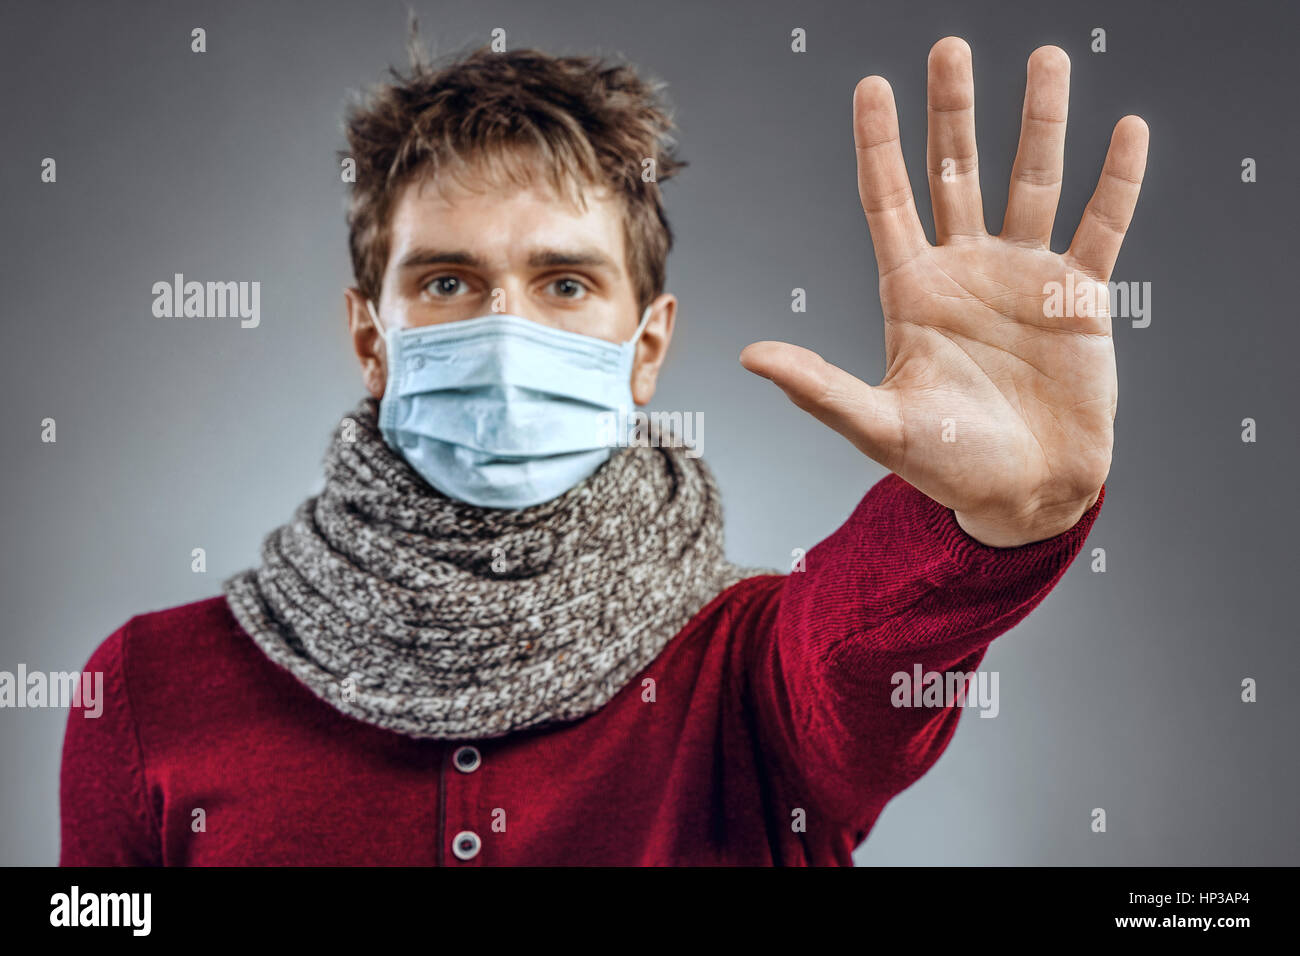 Stop - virus! Sick man in protective mask gesturing stop. Healthcare concept Stock Photo